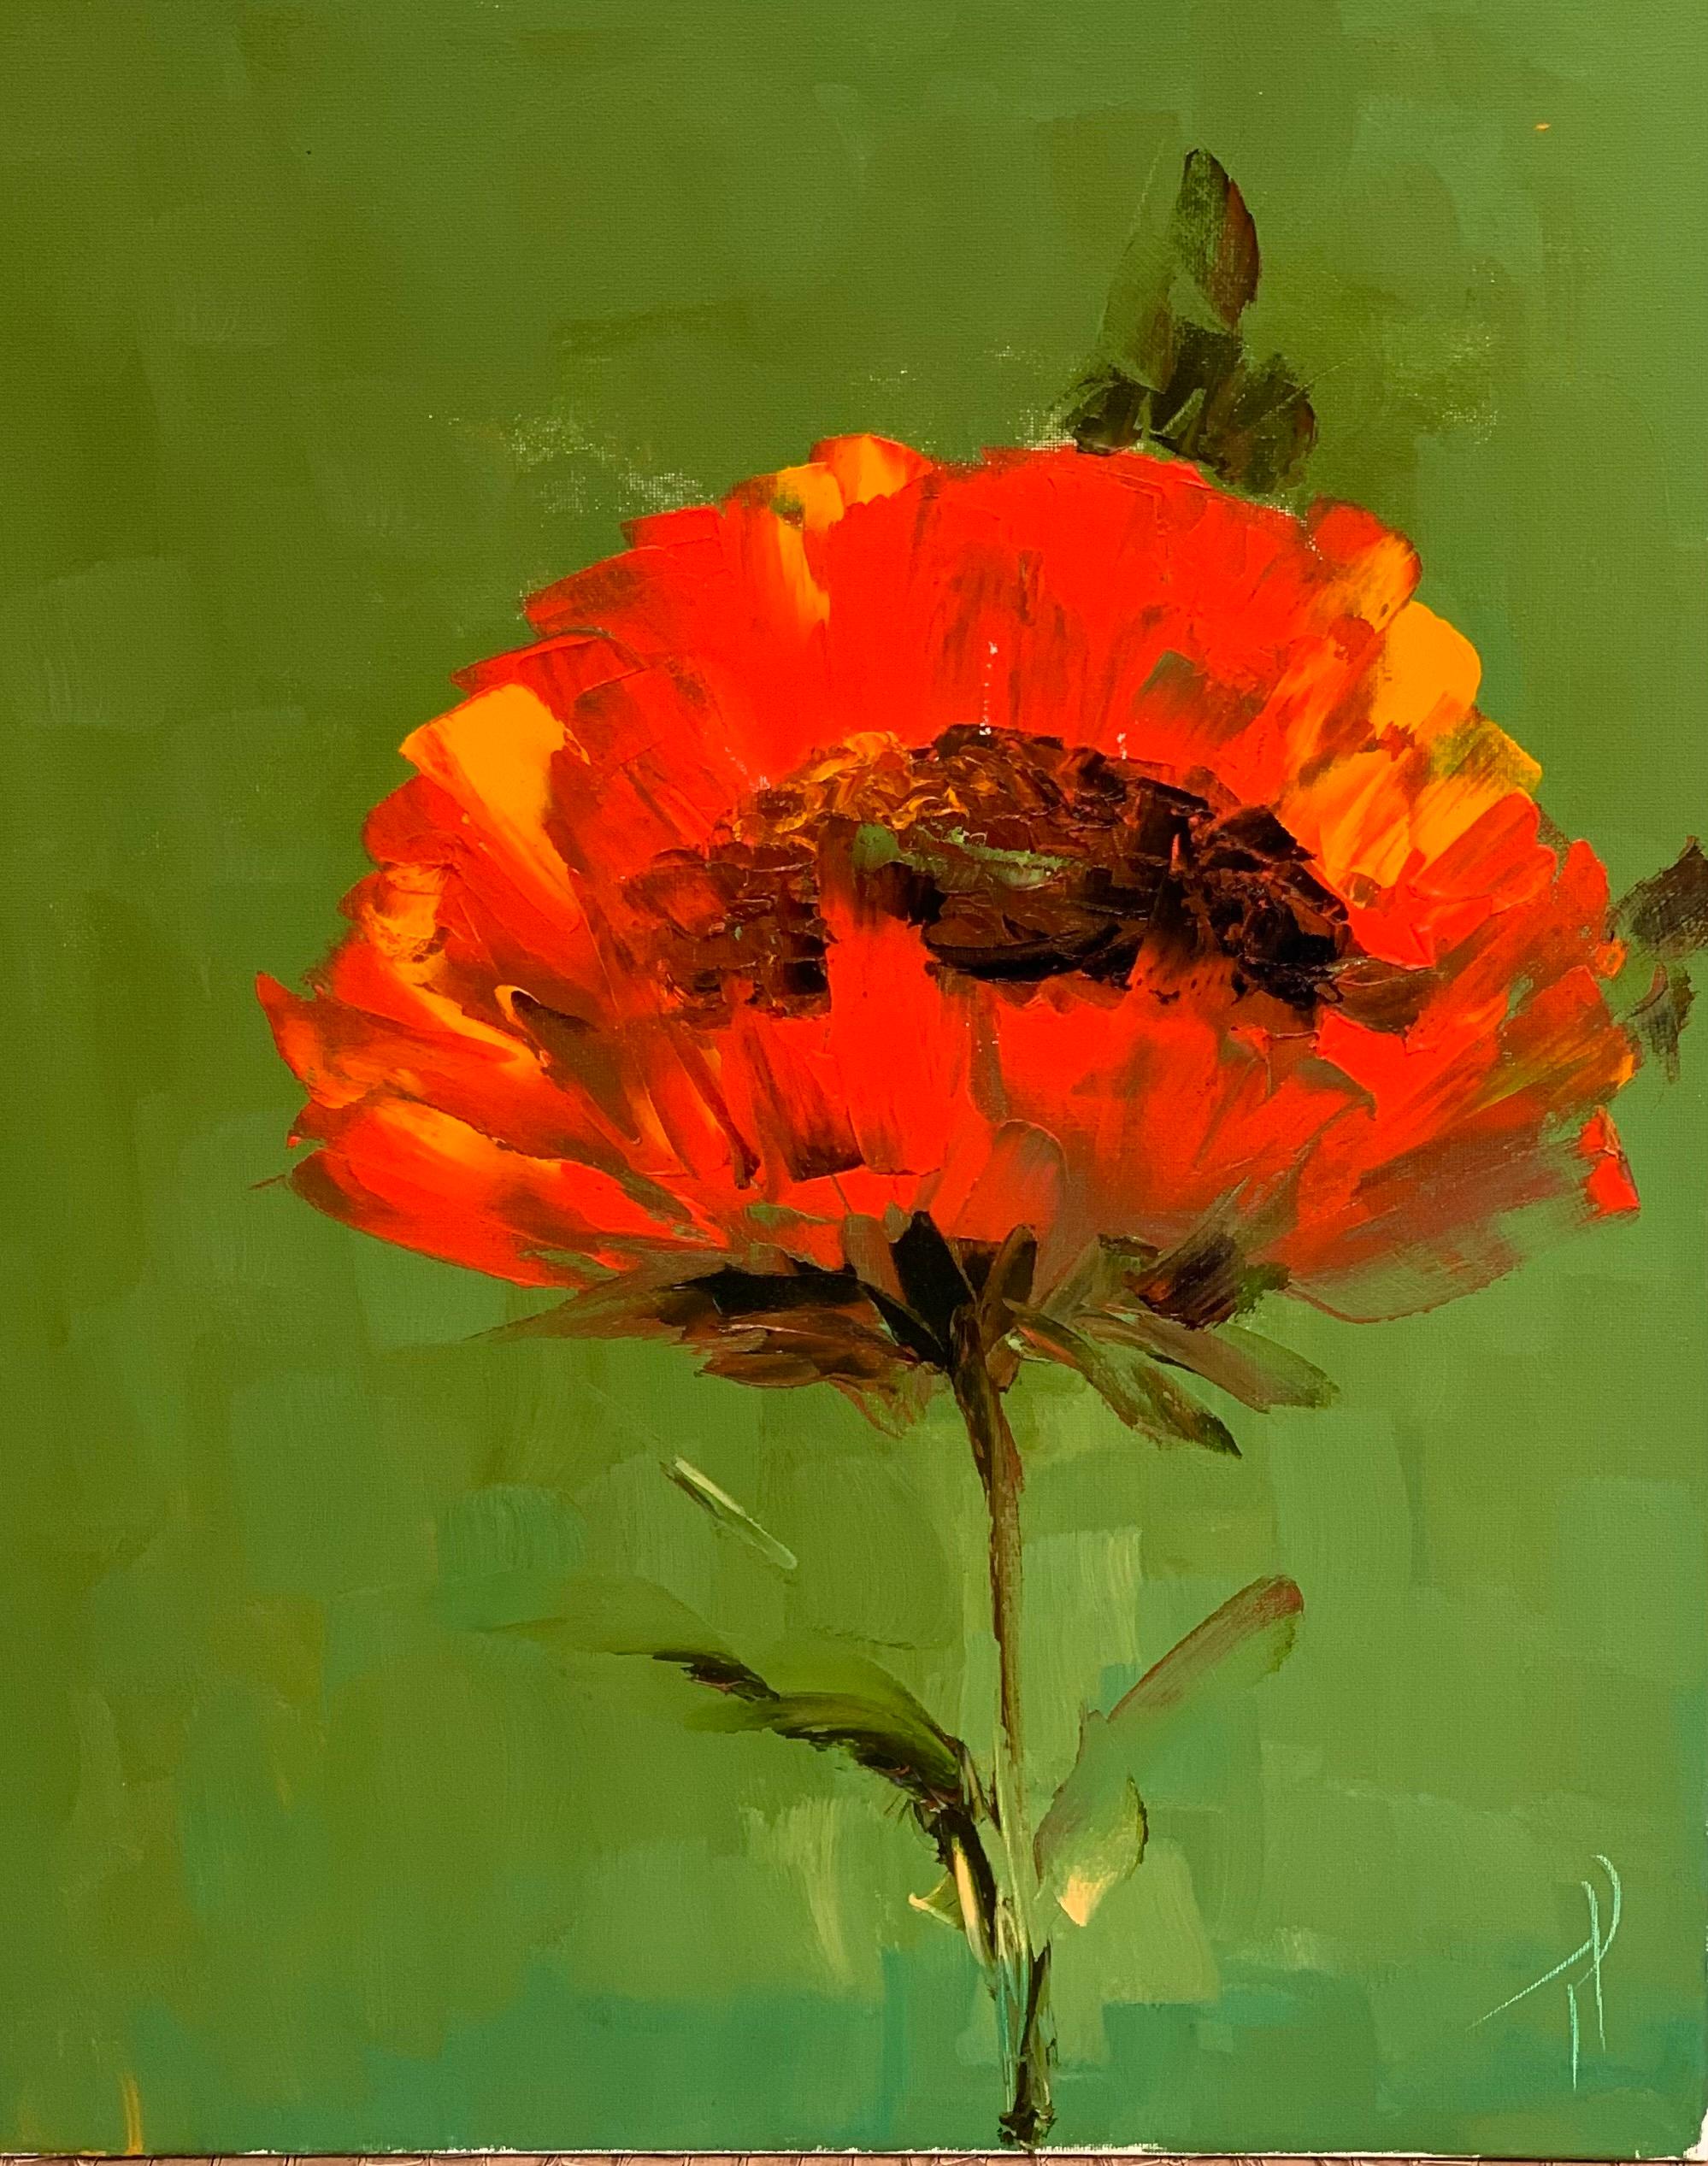 "I'm Still July" is a 20x16 oil painting on canvas by artist Tershovska. Featured is a bright red  flower on a contrasting deep green background. Expressive thick paint usage gives life and expression throughout the painting. Bright contrasting